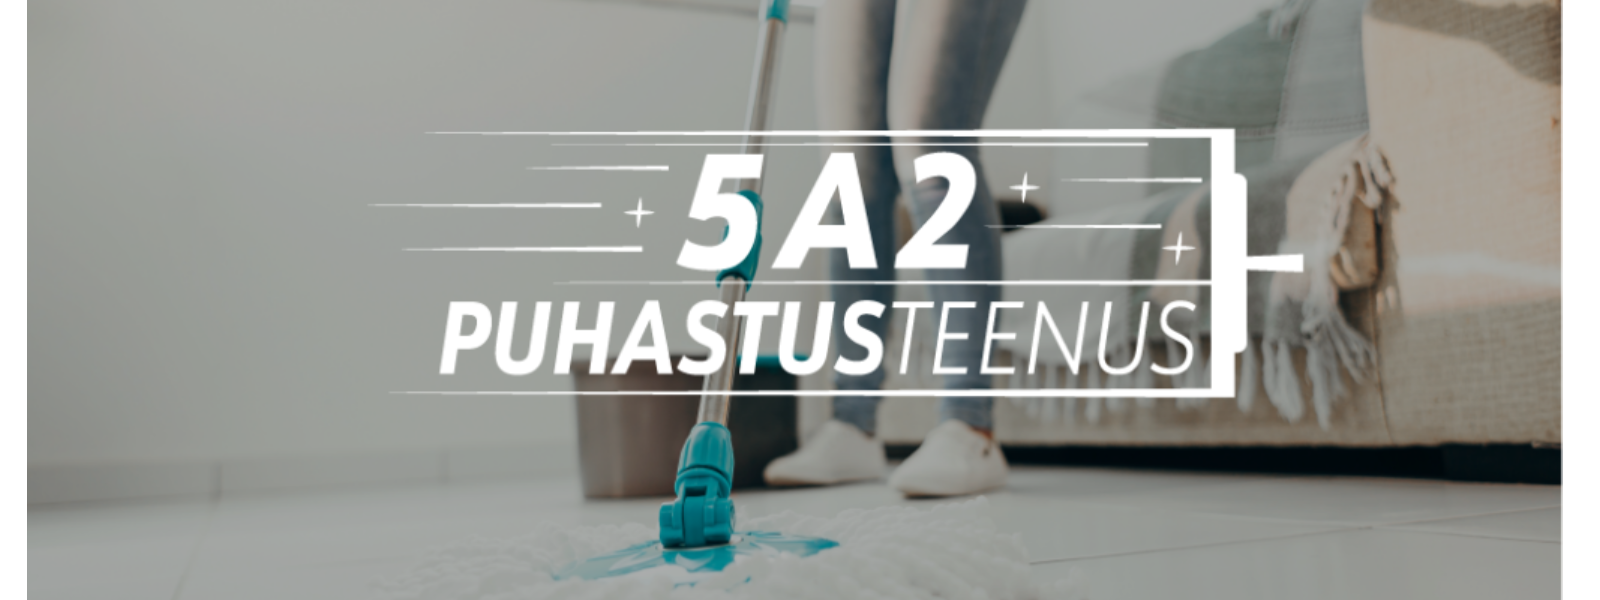 5A2 OÜ - maintenance cleaning of offices, Large cleaning, Maintenance cleaning of commercial premises, cleaning of ut sta...